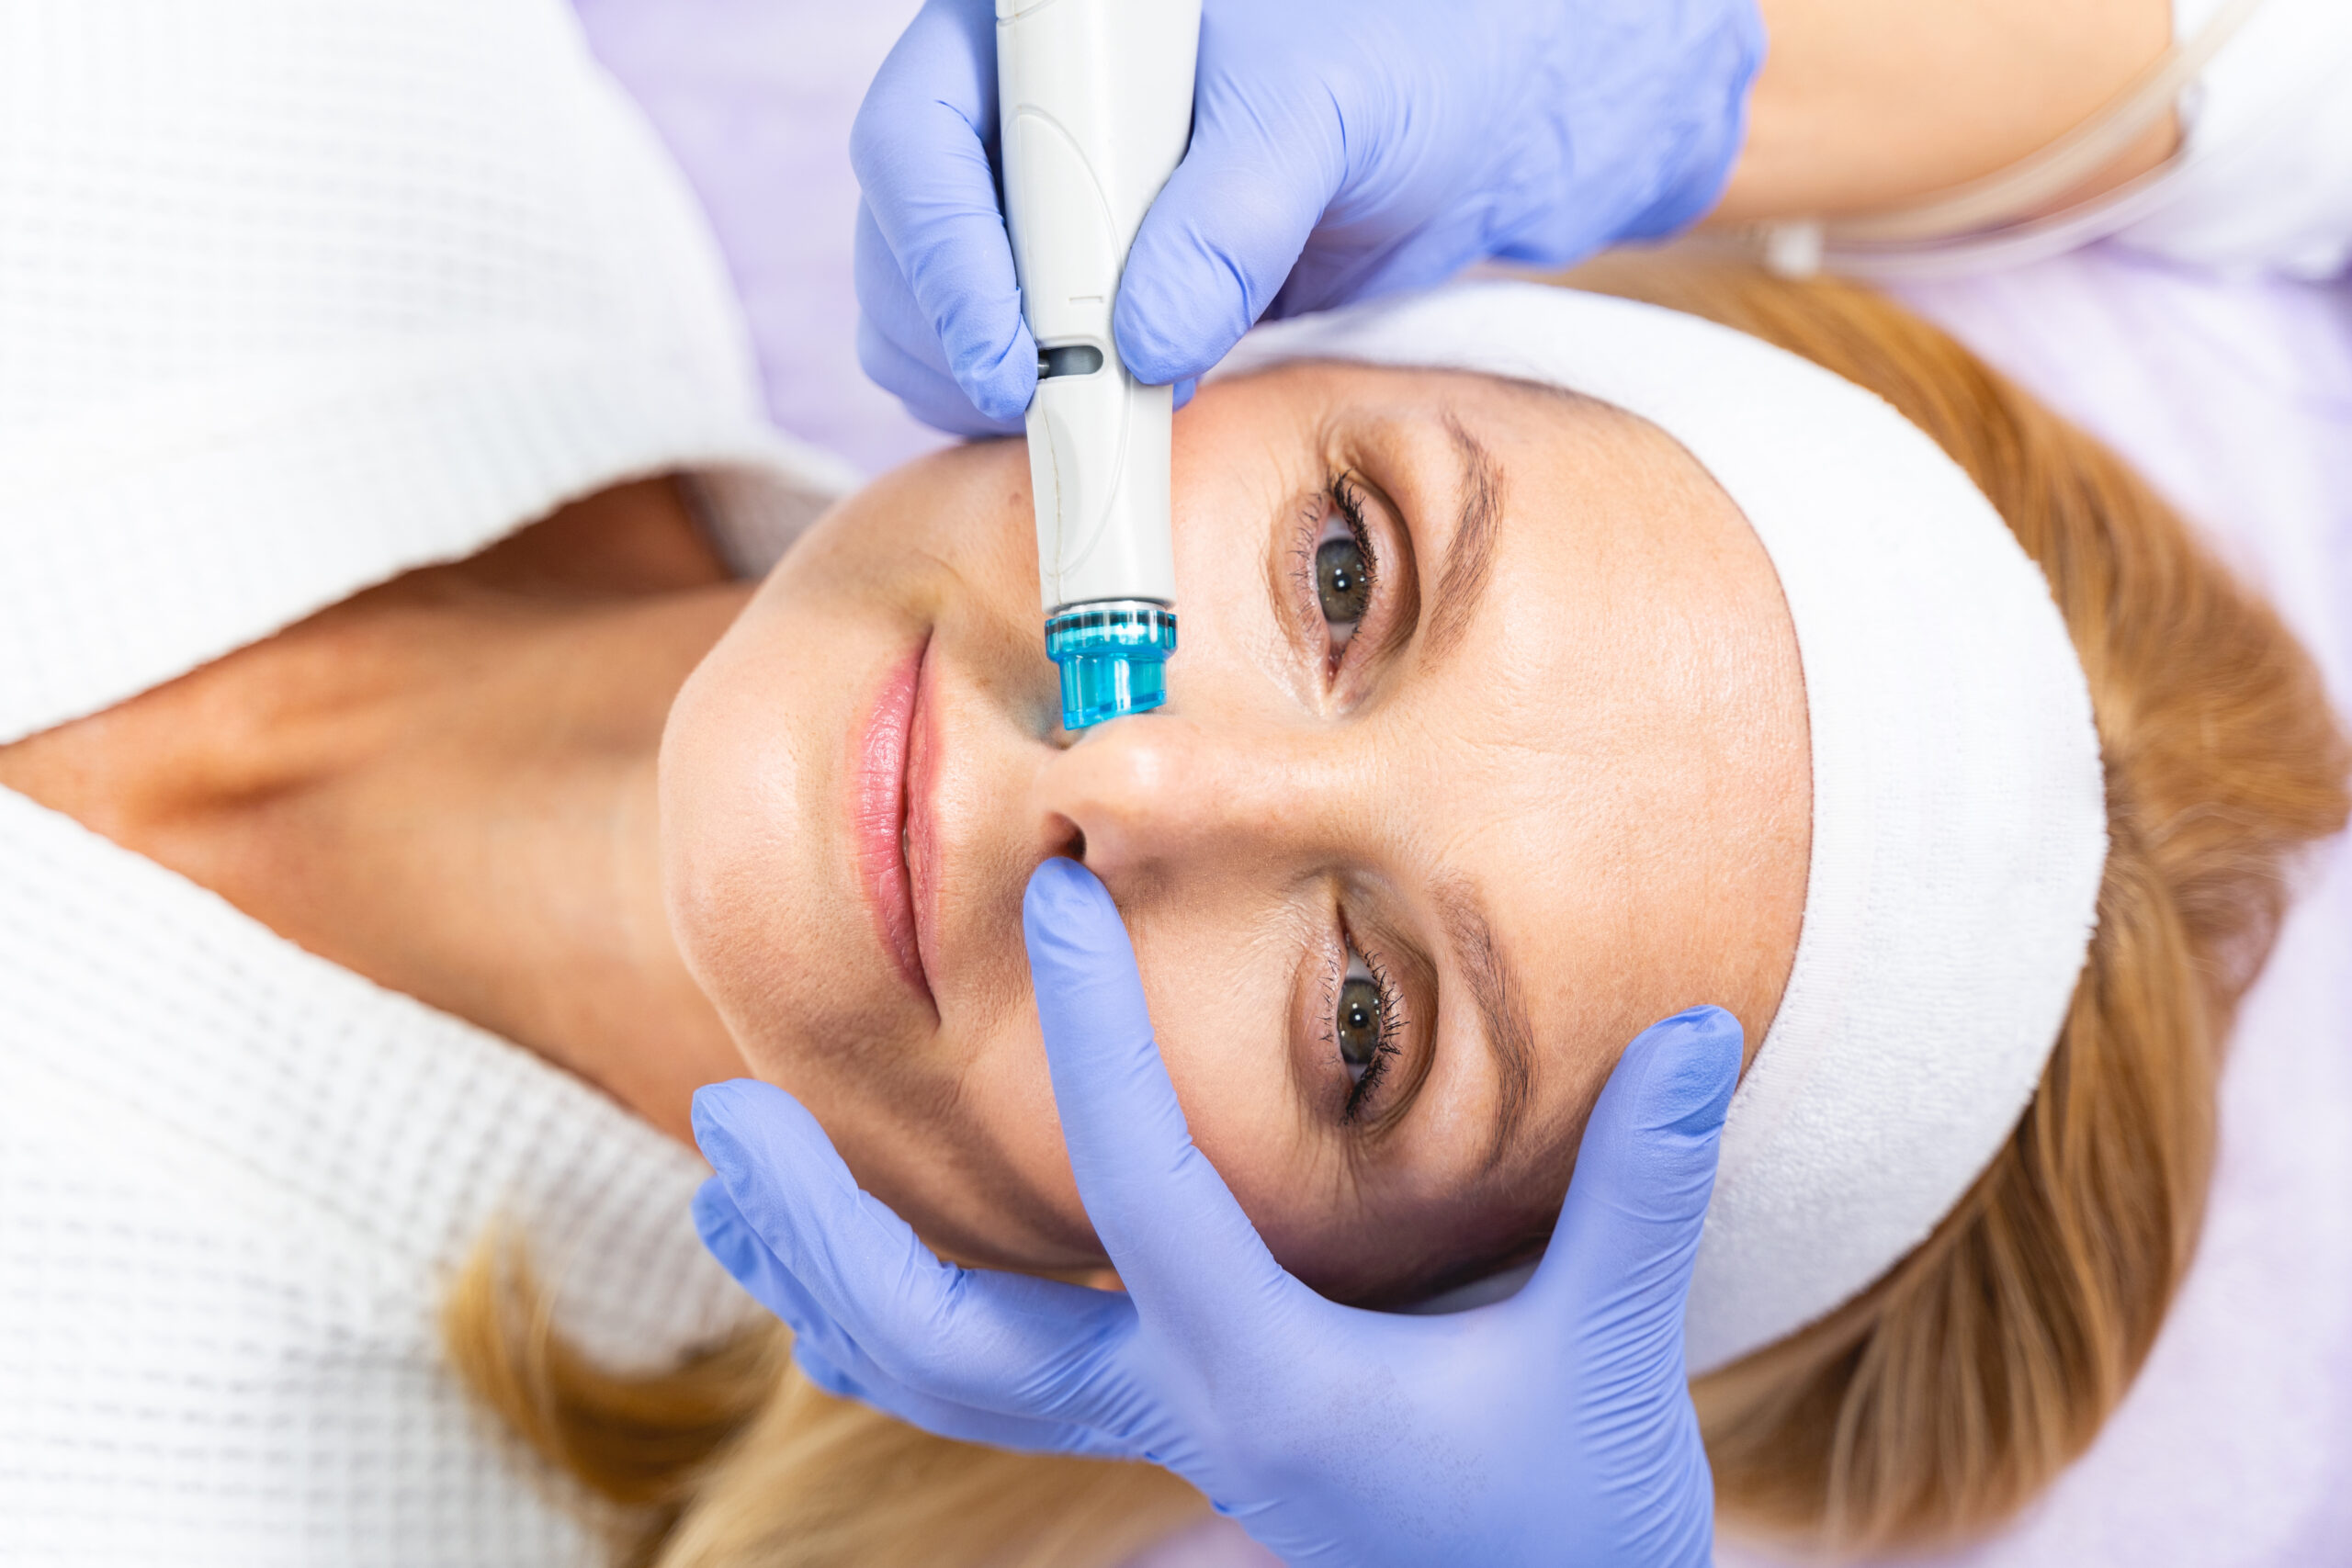 Top view of an attractive calm Caucasian middle-aged lady relaxing during a skin exfoliating procedure